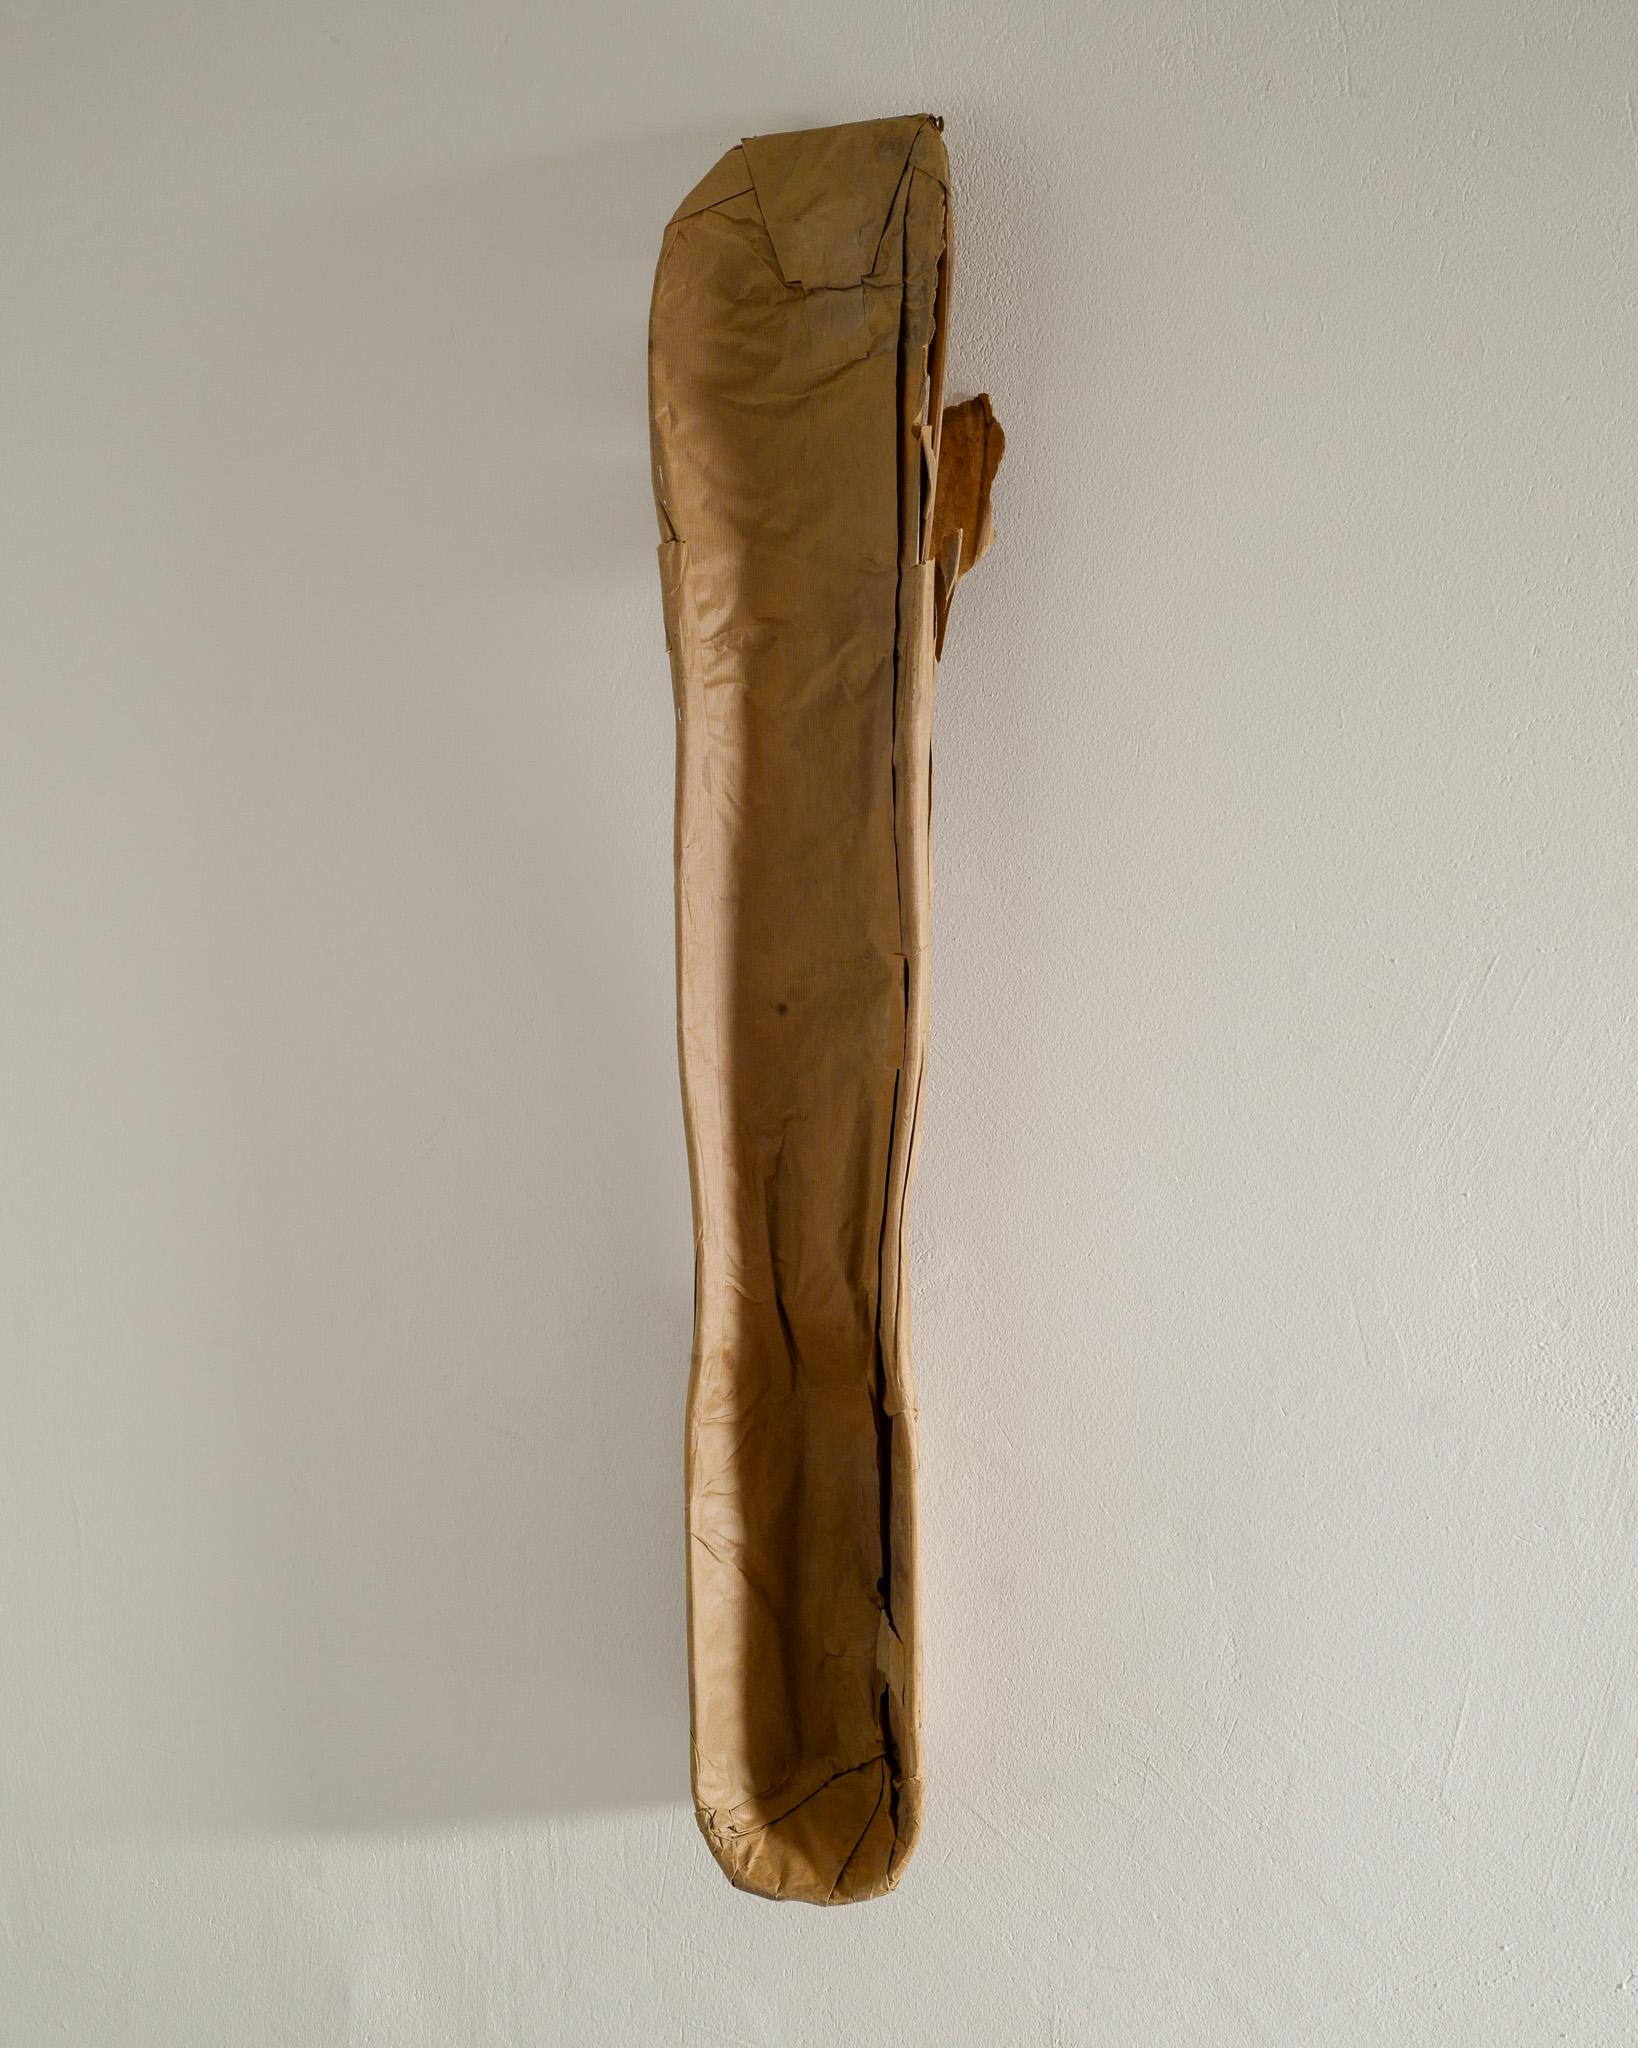 Original Charles & Ray Eames Mid Century Leg Splint in Molded Plywood, 1943 In Good Condition For Sale In Stockholm, SE